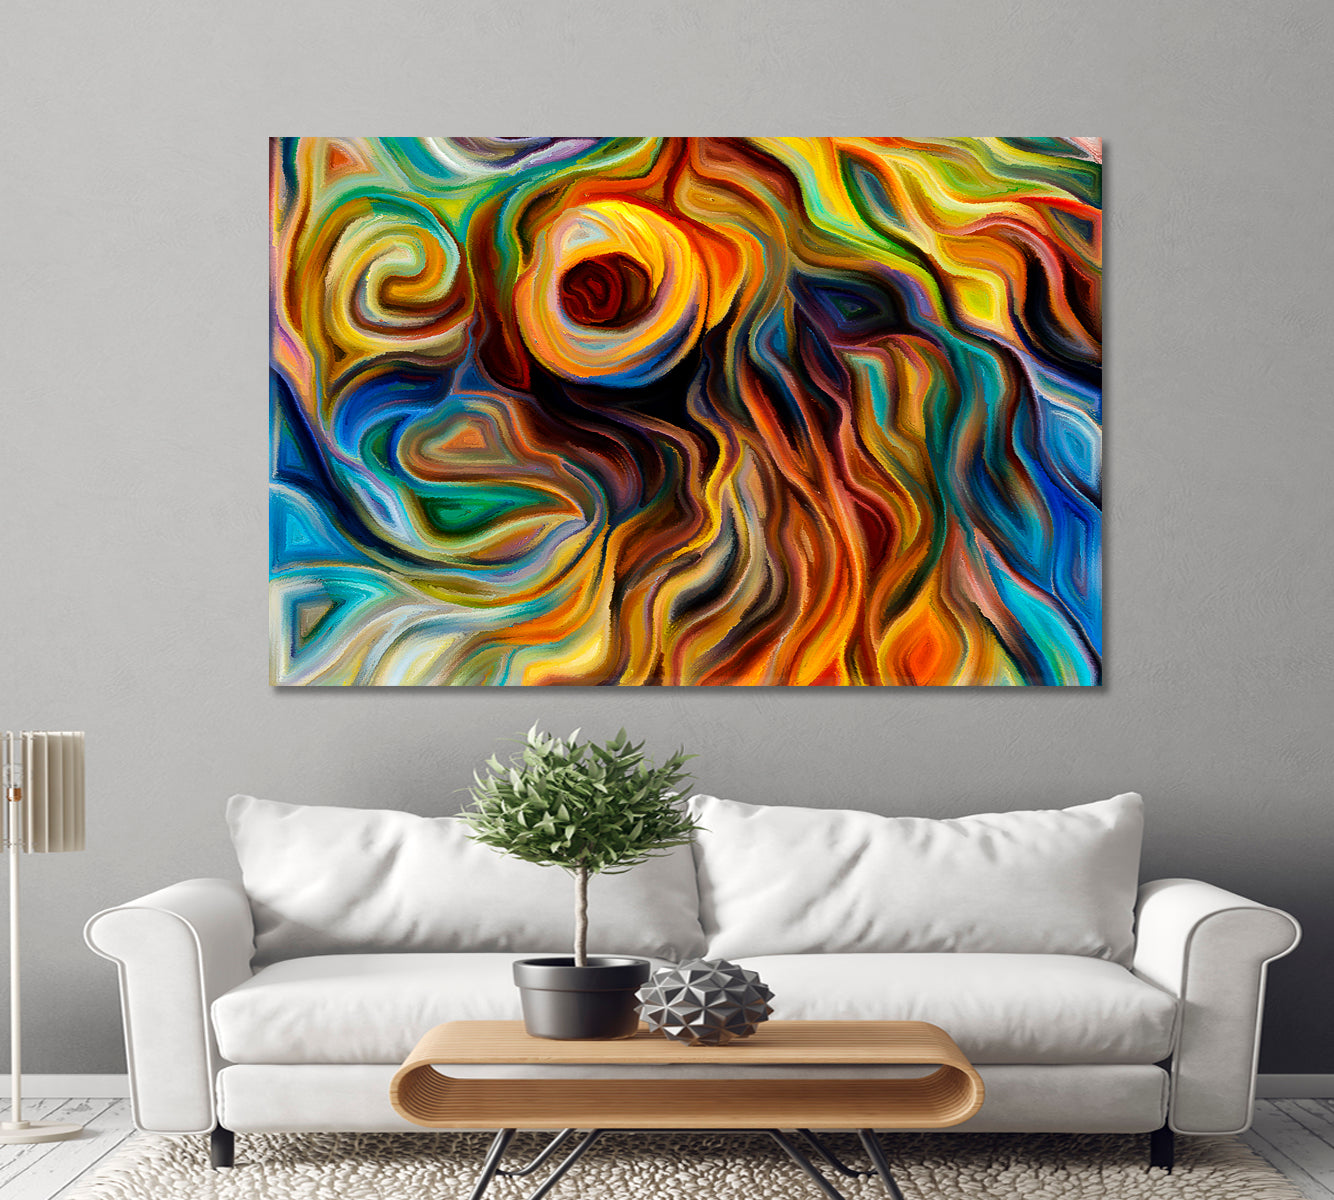 VIVID EYE CATCHER  Contemporary Abstraction Abstract Art Print Artesty 1 panel 24" x 16" 